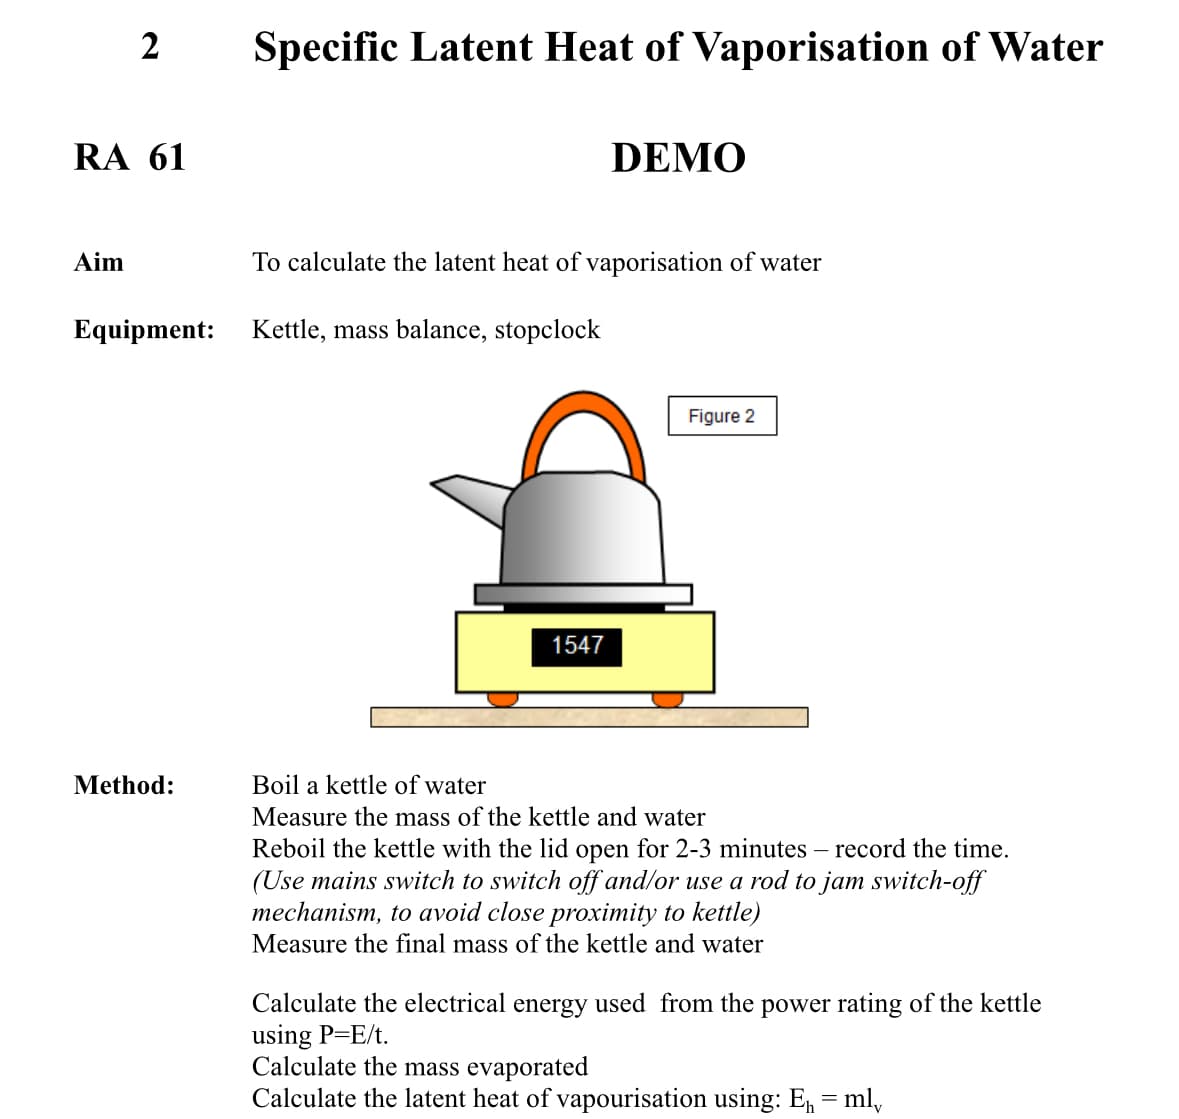 2
Specific Latent Heat of Vaporisation of Water
RA 61
DEMO
Aim
To calculate the latent heat of vaporisation of water
Equipment: Kettle, mass balance, stopclock
Method:
1547
Figure 2
Boil a kettle of water
Measure the mass of the kettle and water
Reboil the kettle with the lid open for 2-3 minutes - record the time.
(Use mains switch to switch off and/or use a rod to jam switch-off
mechanism, to avoid close proximity to kettle)
Measure the final mass of the kettle and water
Calculate the electrical energy used from the power rating of the kettle
using P=E/t.
Calculate the mass evaporated
Calculate the latent heat of vapourisation using: E₁ = ml₁